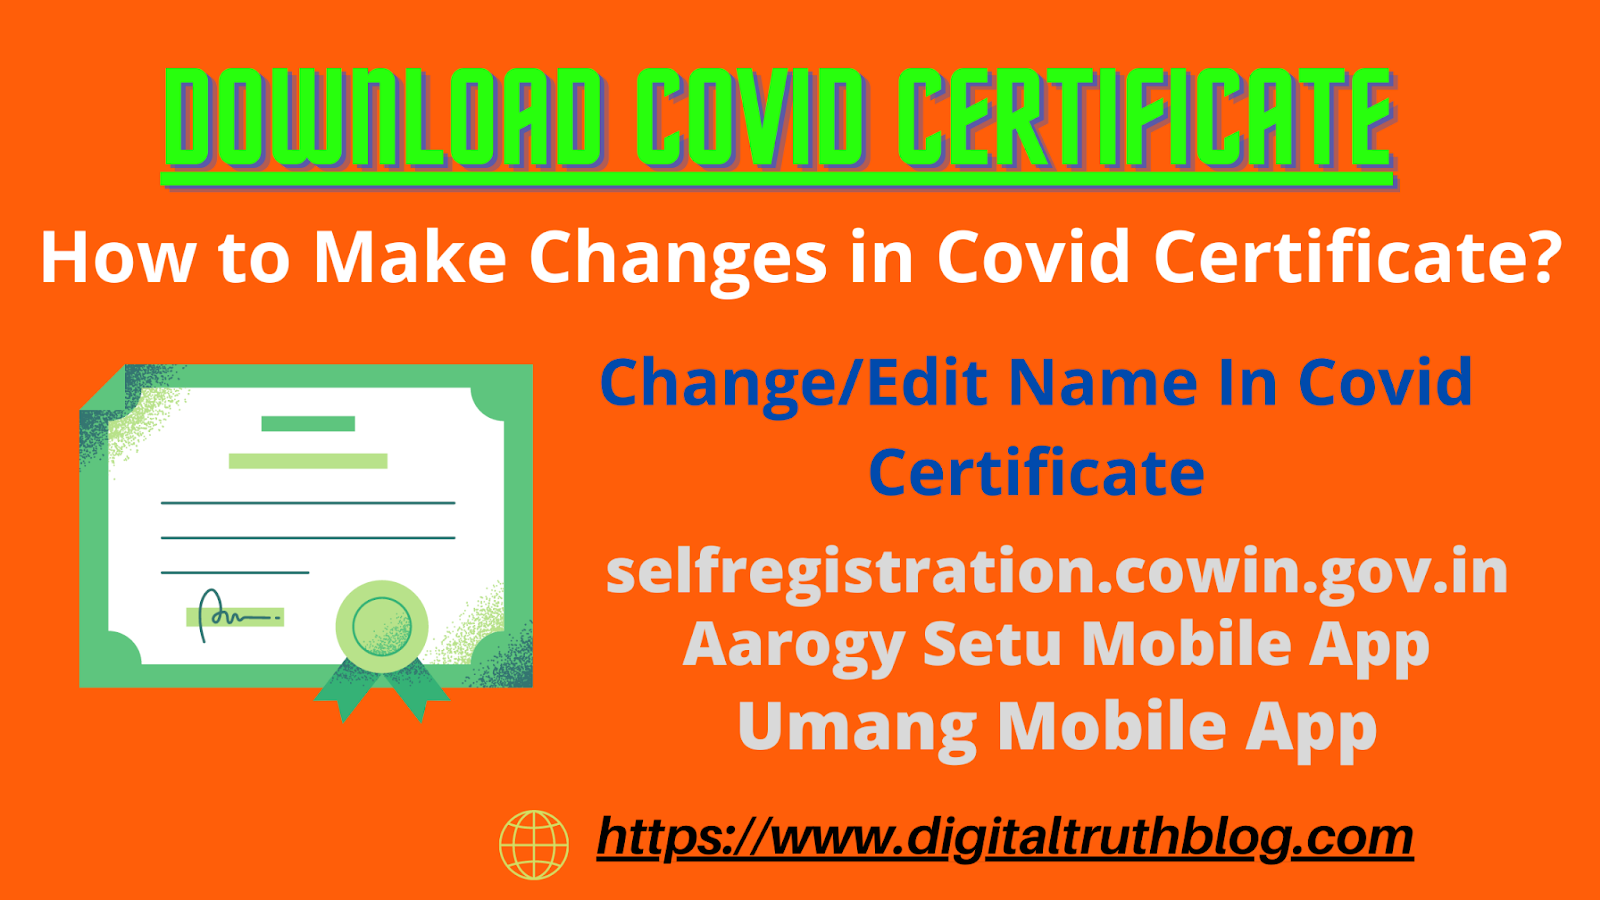 learn how to download covid certificate from Arogya setu app and umang app and make changes in covid certificate